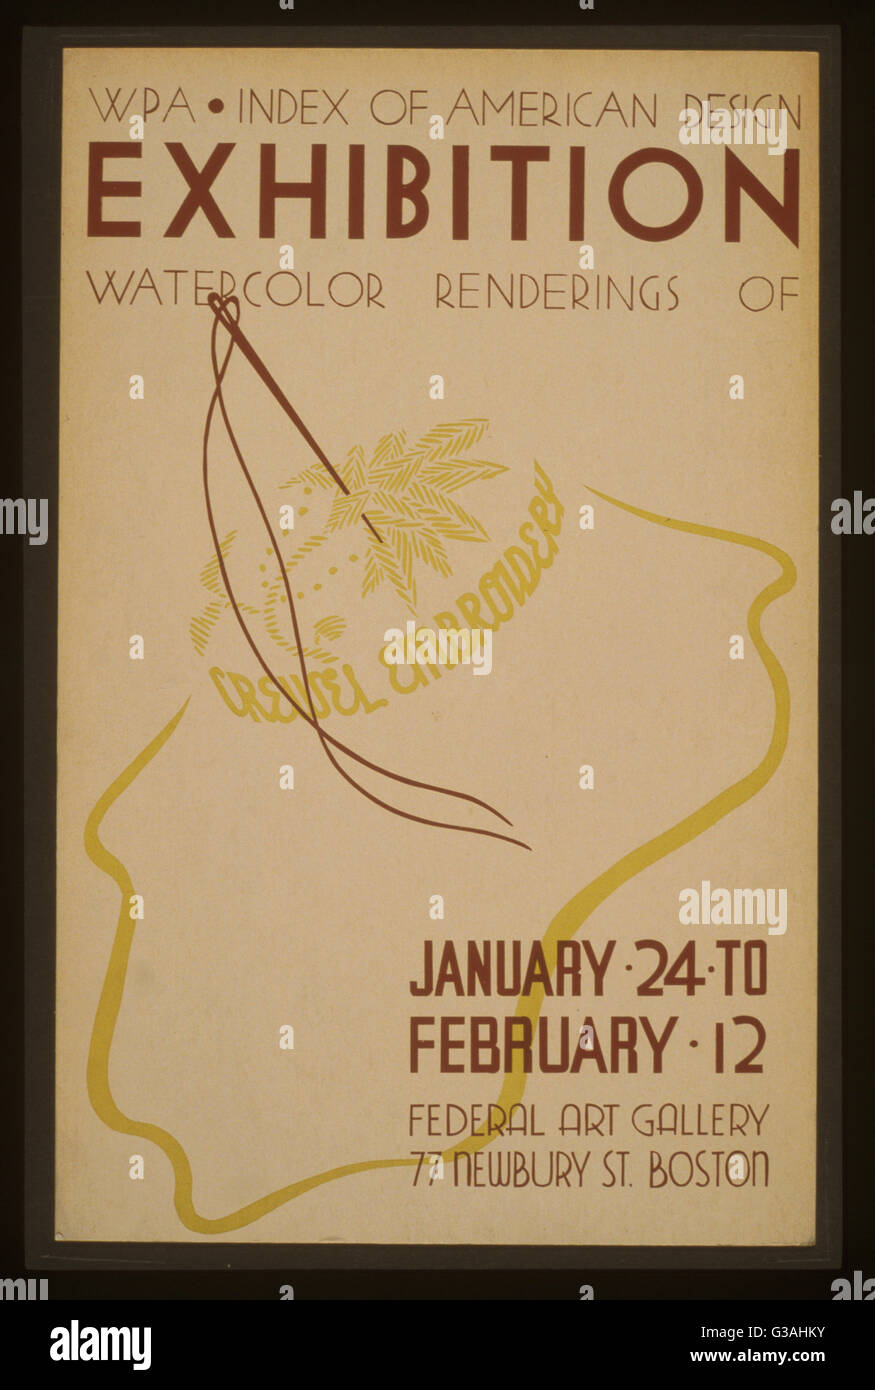 WPA Index of American Design exhibition Watercolor renderings of crewel embroidery. Poster announcing exhibition of embroidery designs in watercolors at the Federal Art Gallery, 77 Newbury St., Boston, showing embroidered design. Date between 1936 and 193 Stock Photo